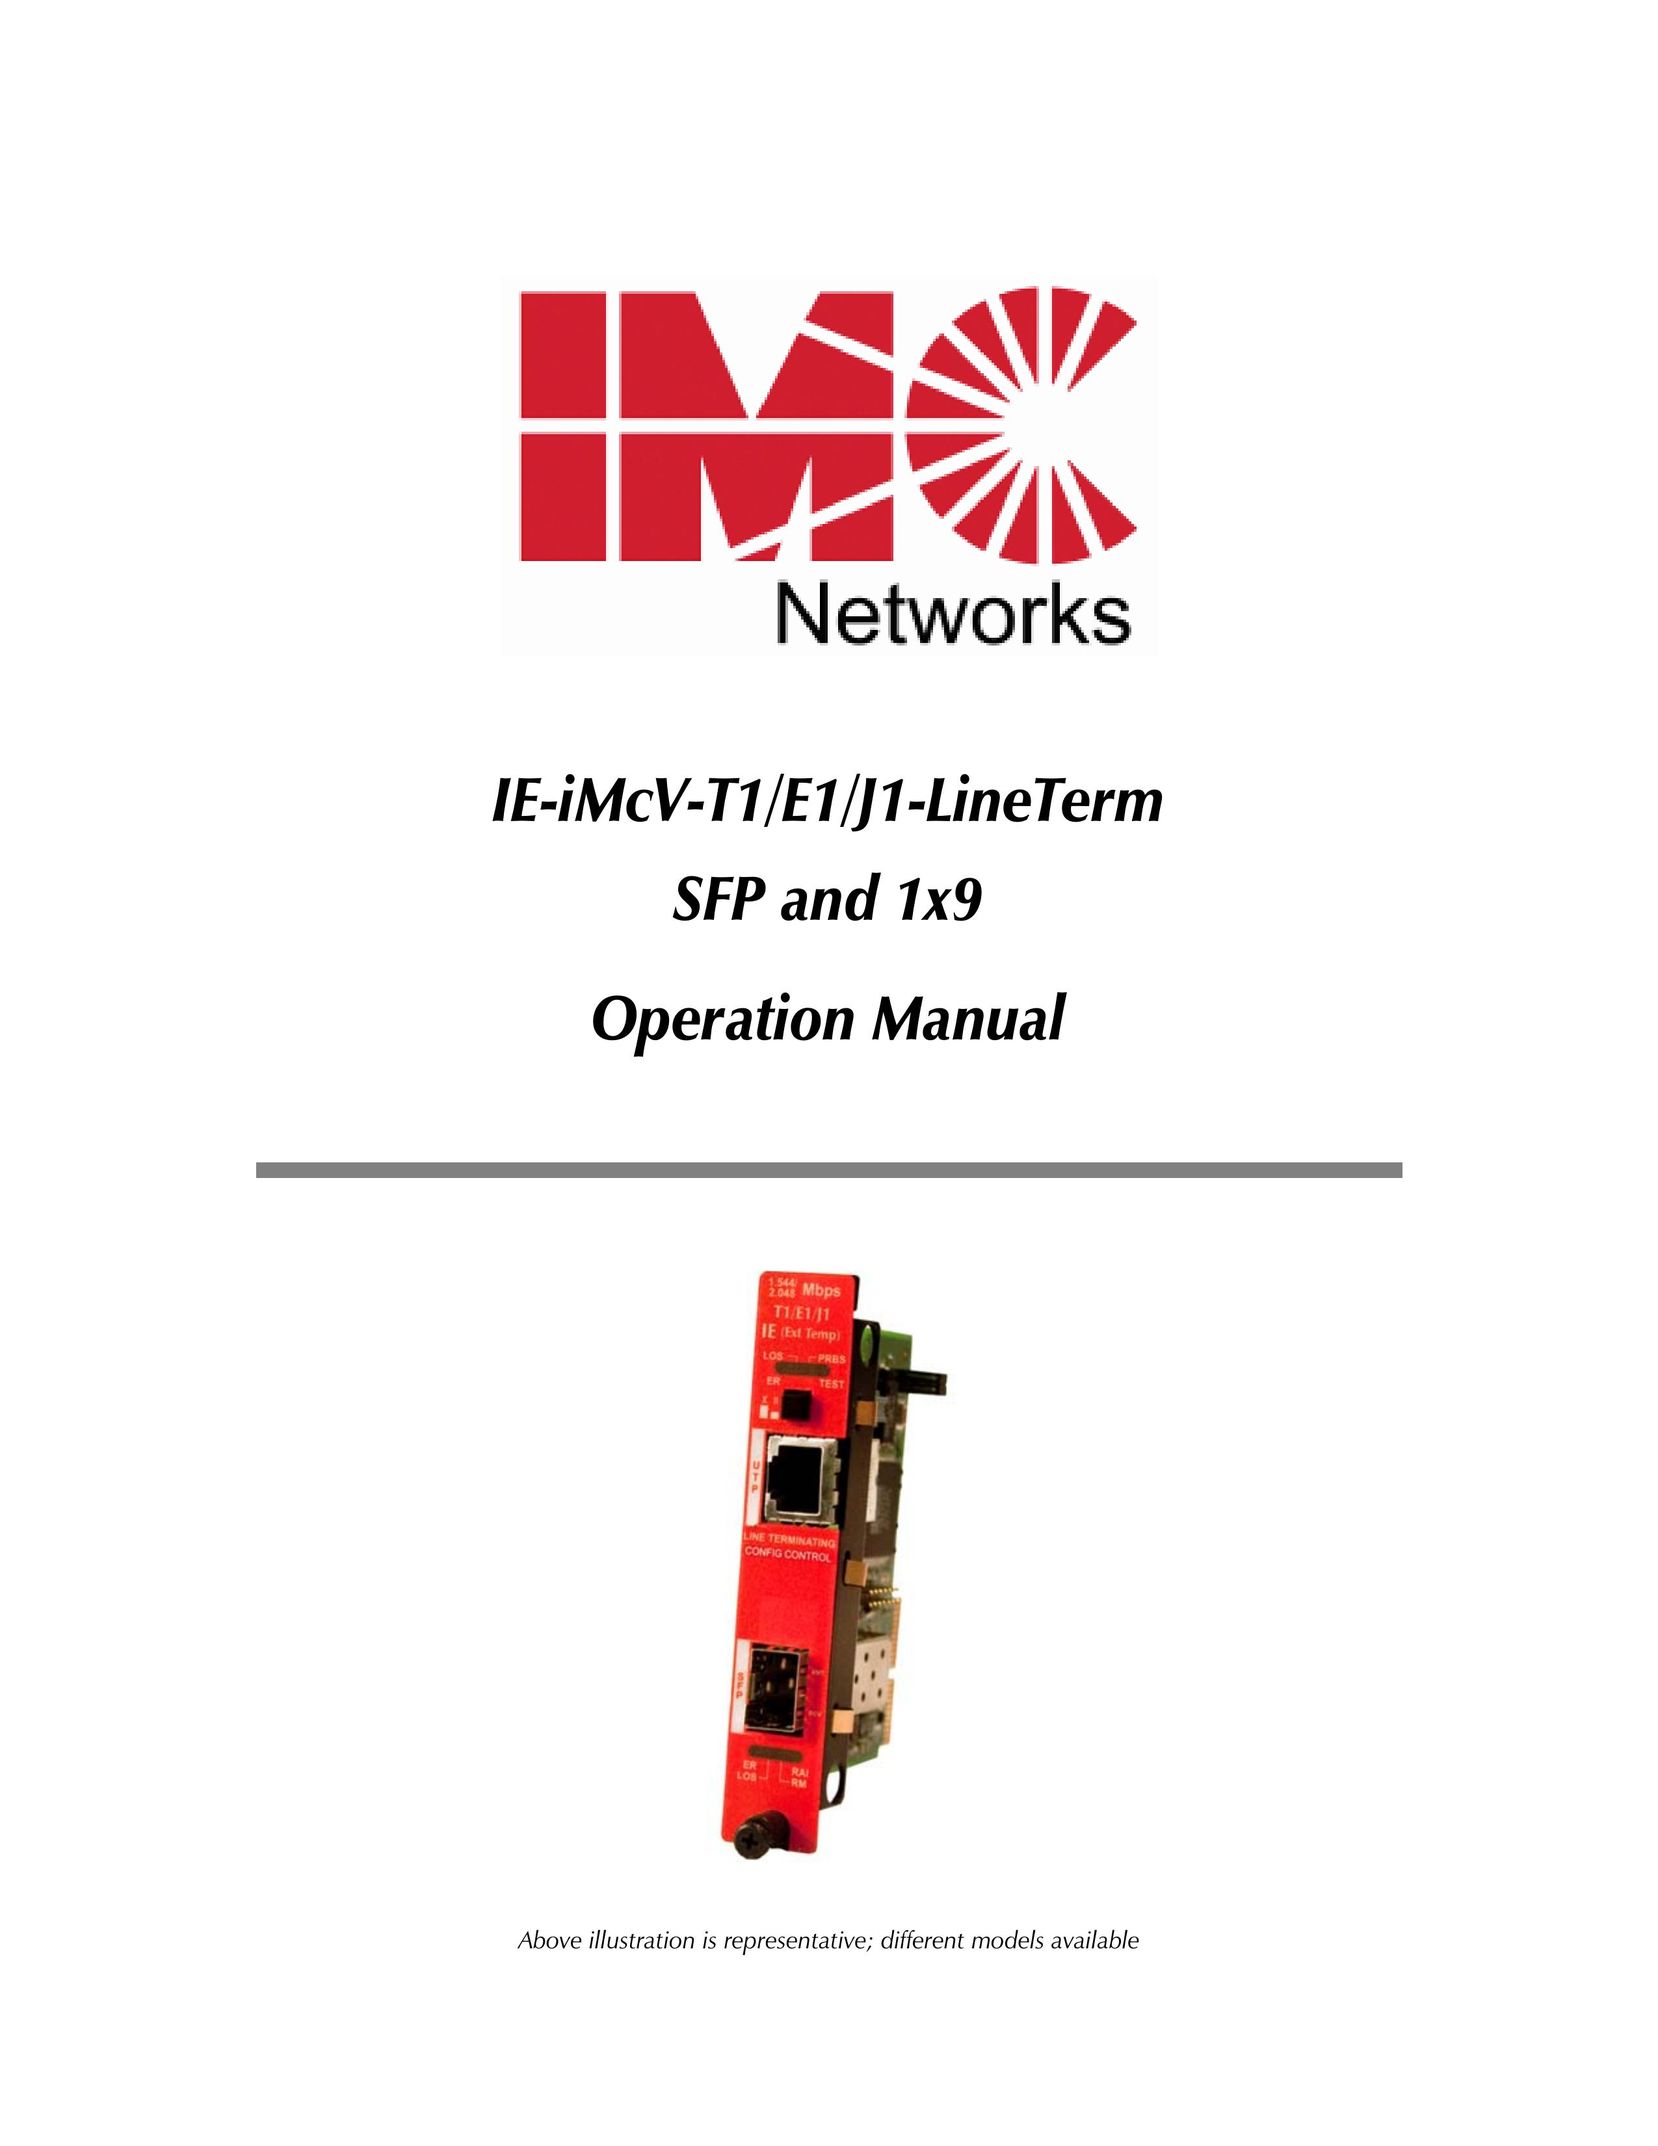 IMC Networks IE-IMCV-T1 Network Card User Manual